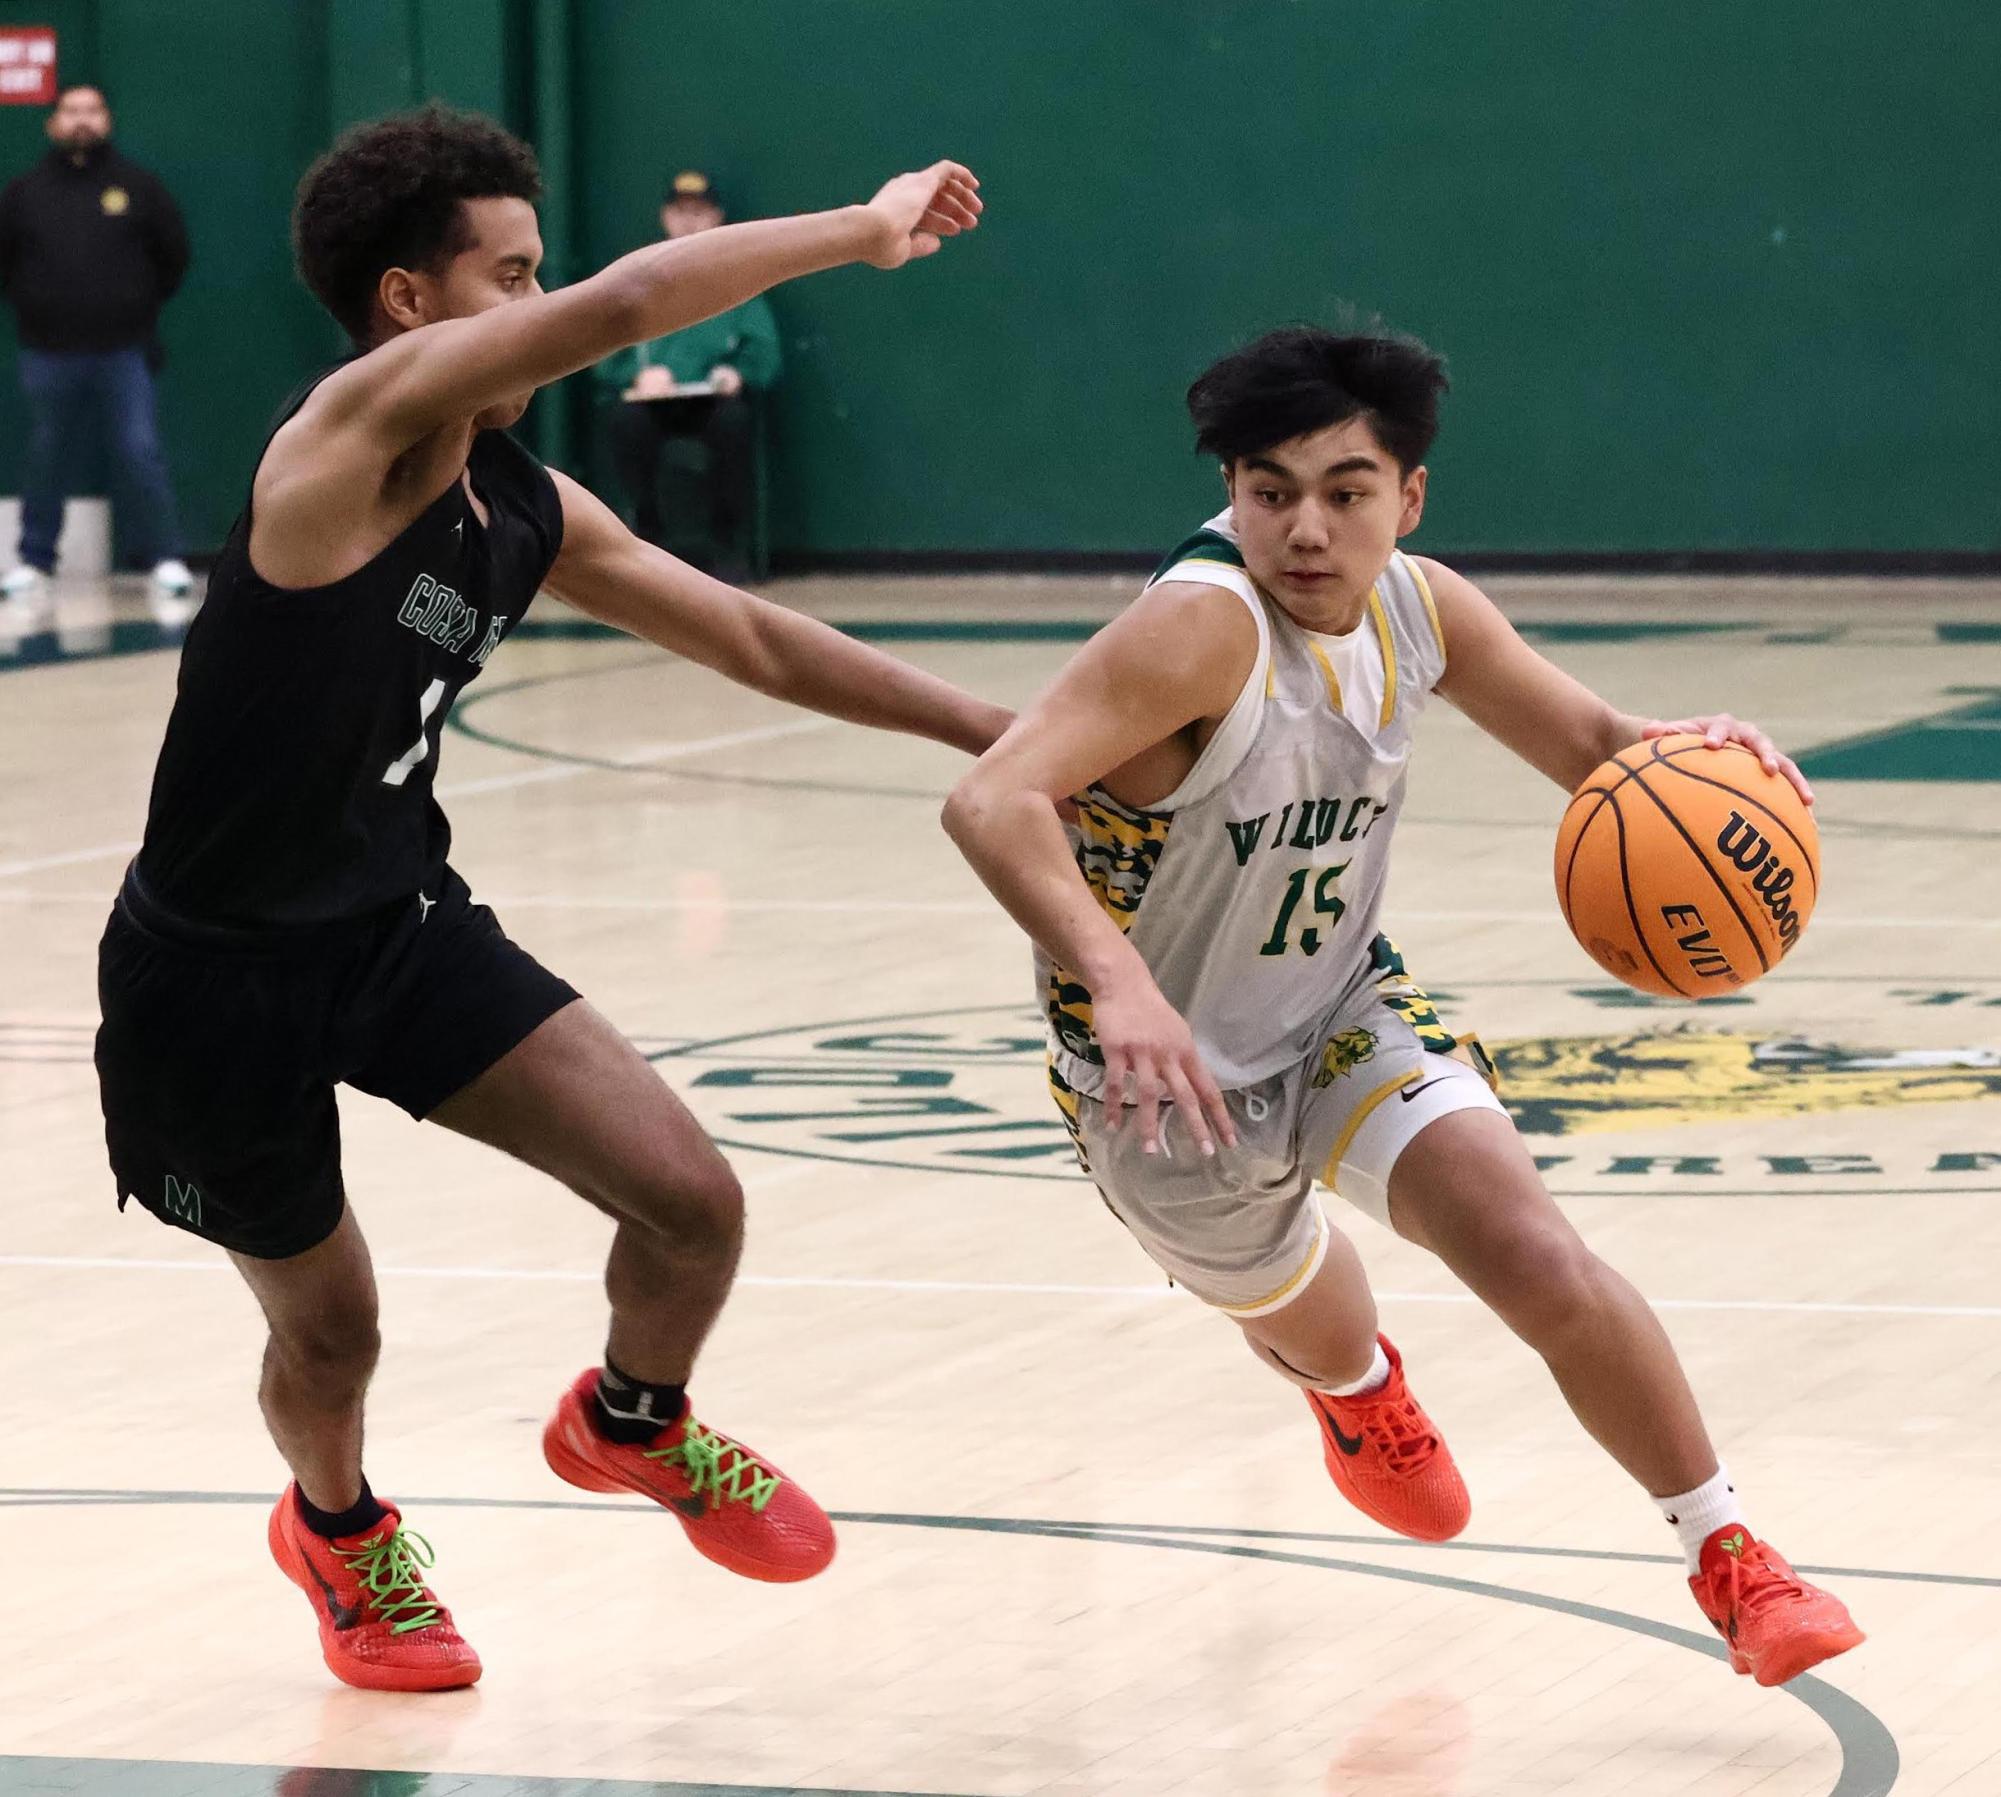 Costa Mesa High School Defeats Wildcats 69-41 in CIF-SS Division 4AA Playoffs; Players Reflect on Defensive Struggles and Scoring Woes